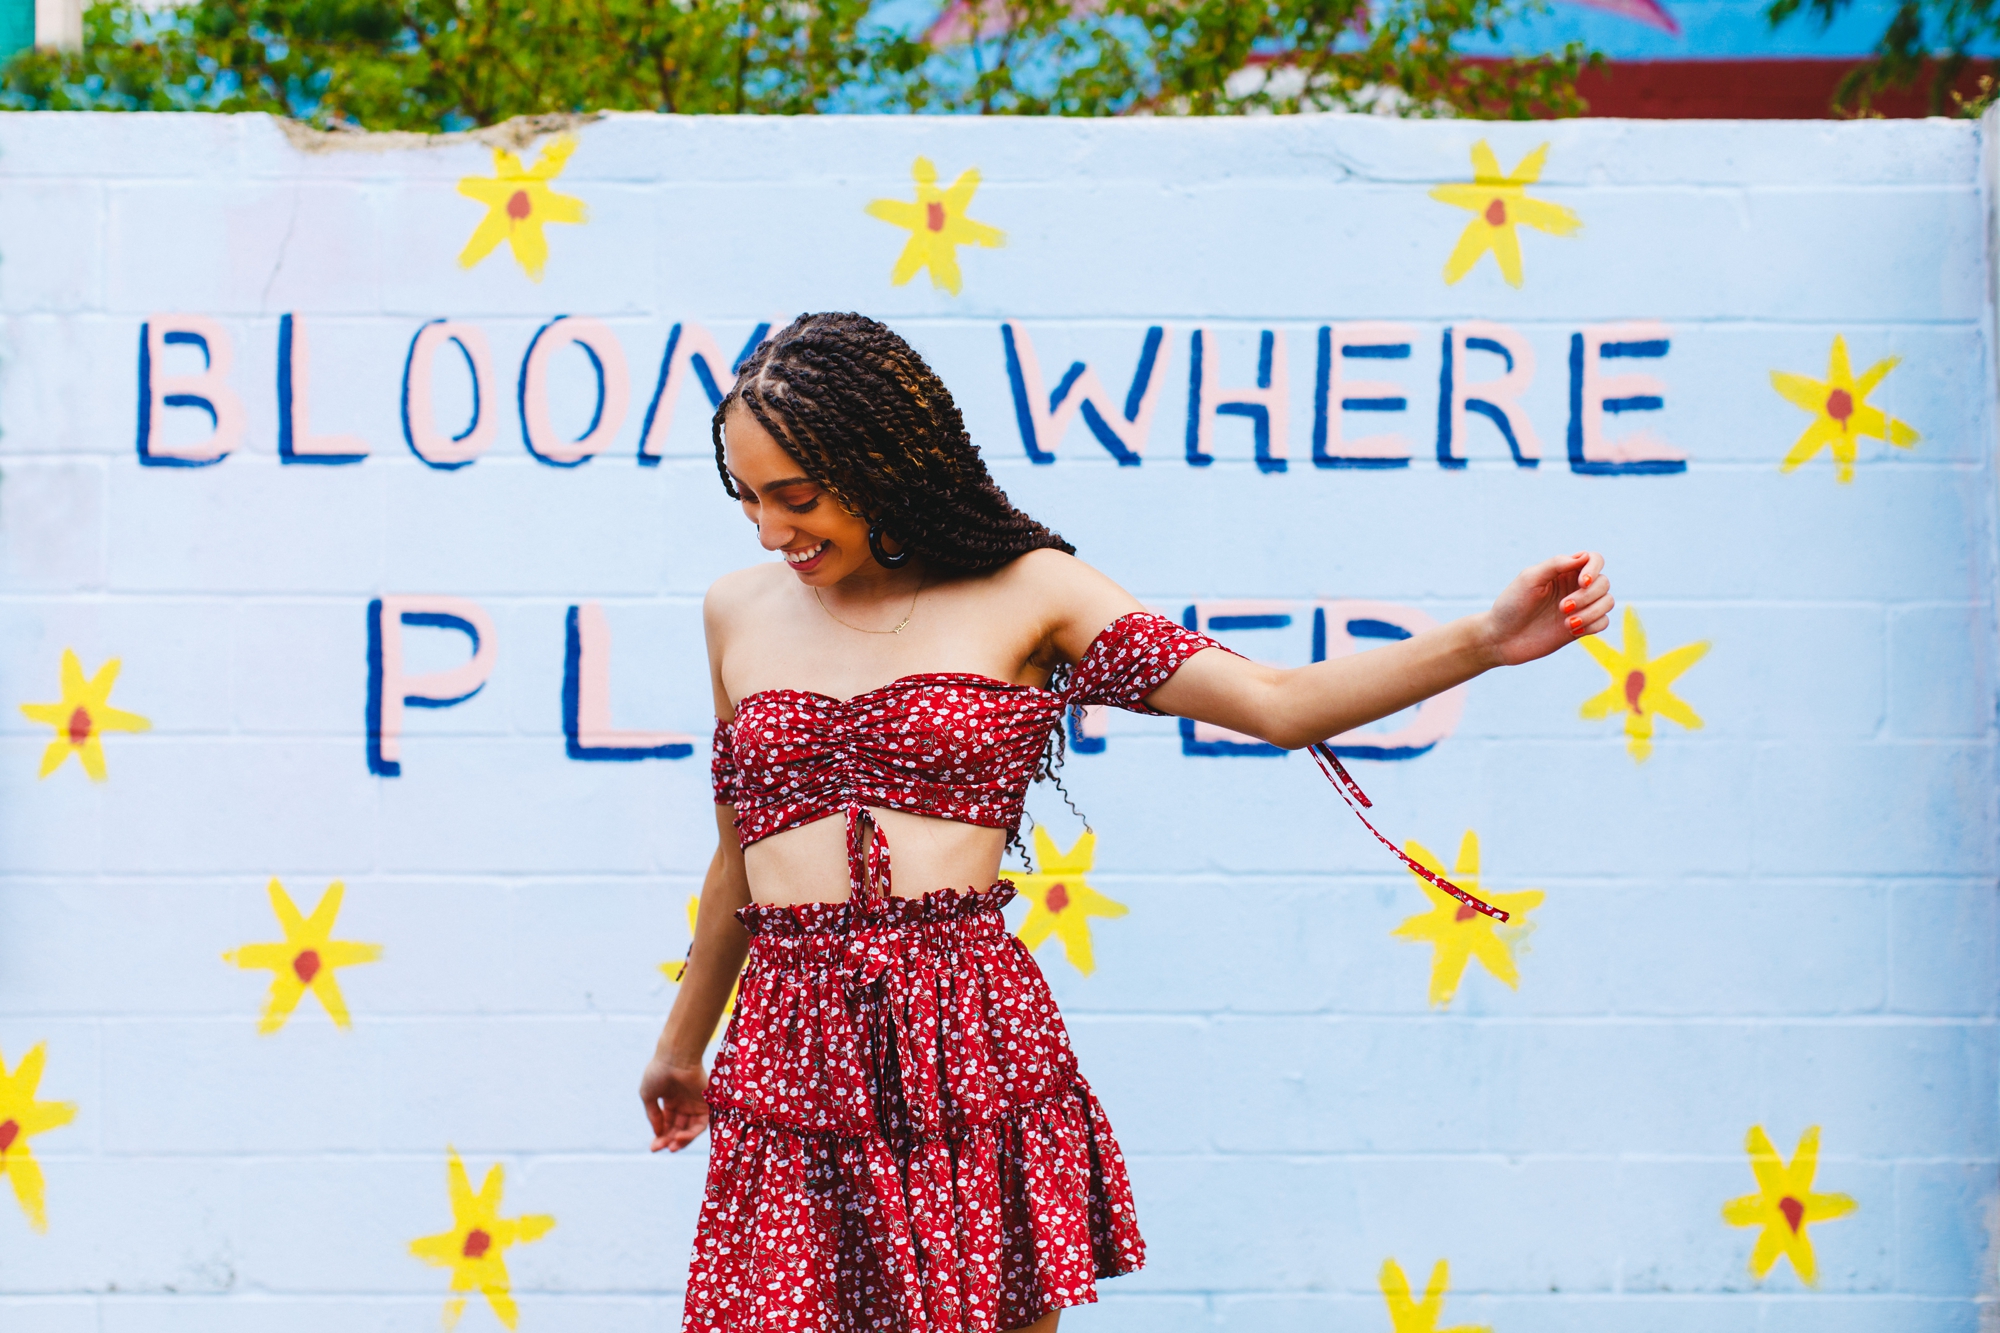 Alize dances in front of a mural that reads "bloom where planted"